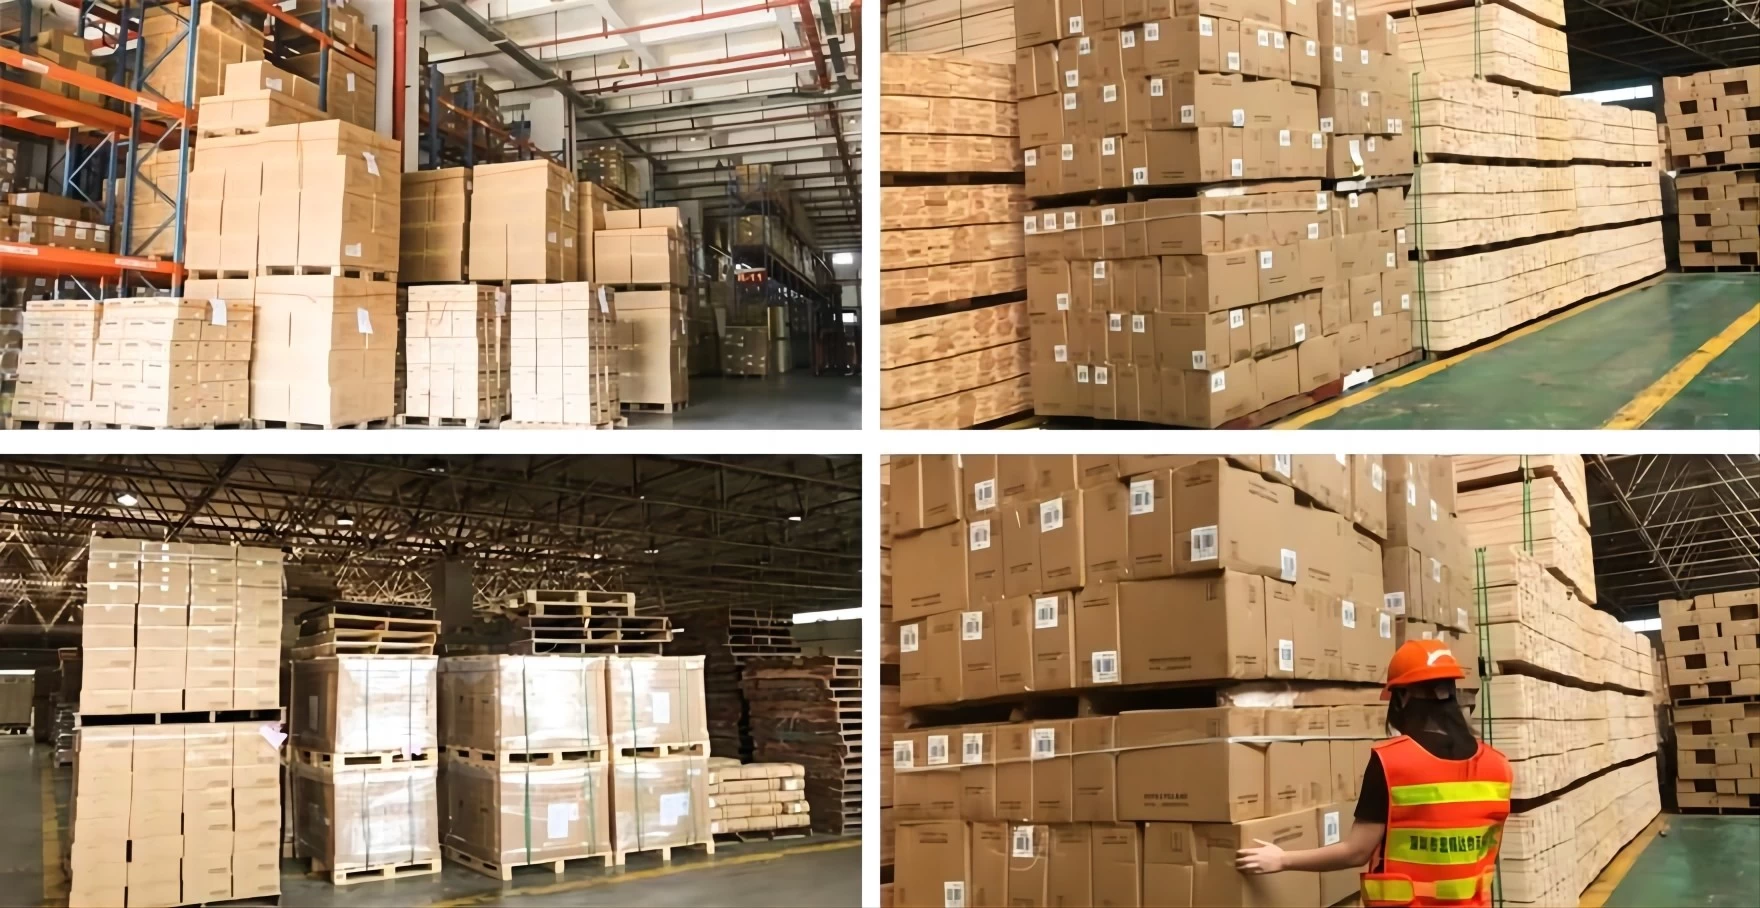  Air freight  from Manila Philippines to Australia ​​​​​​​FCL container express delivery warehouse in Shenzhen logistics services